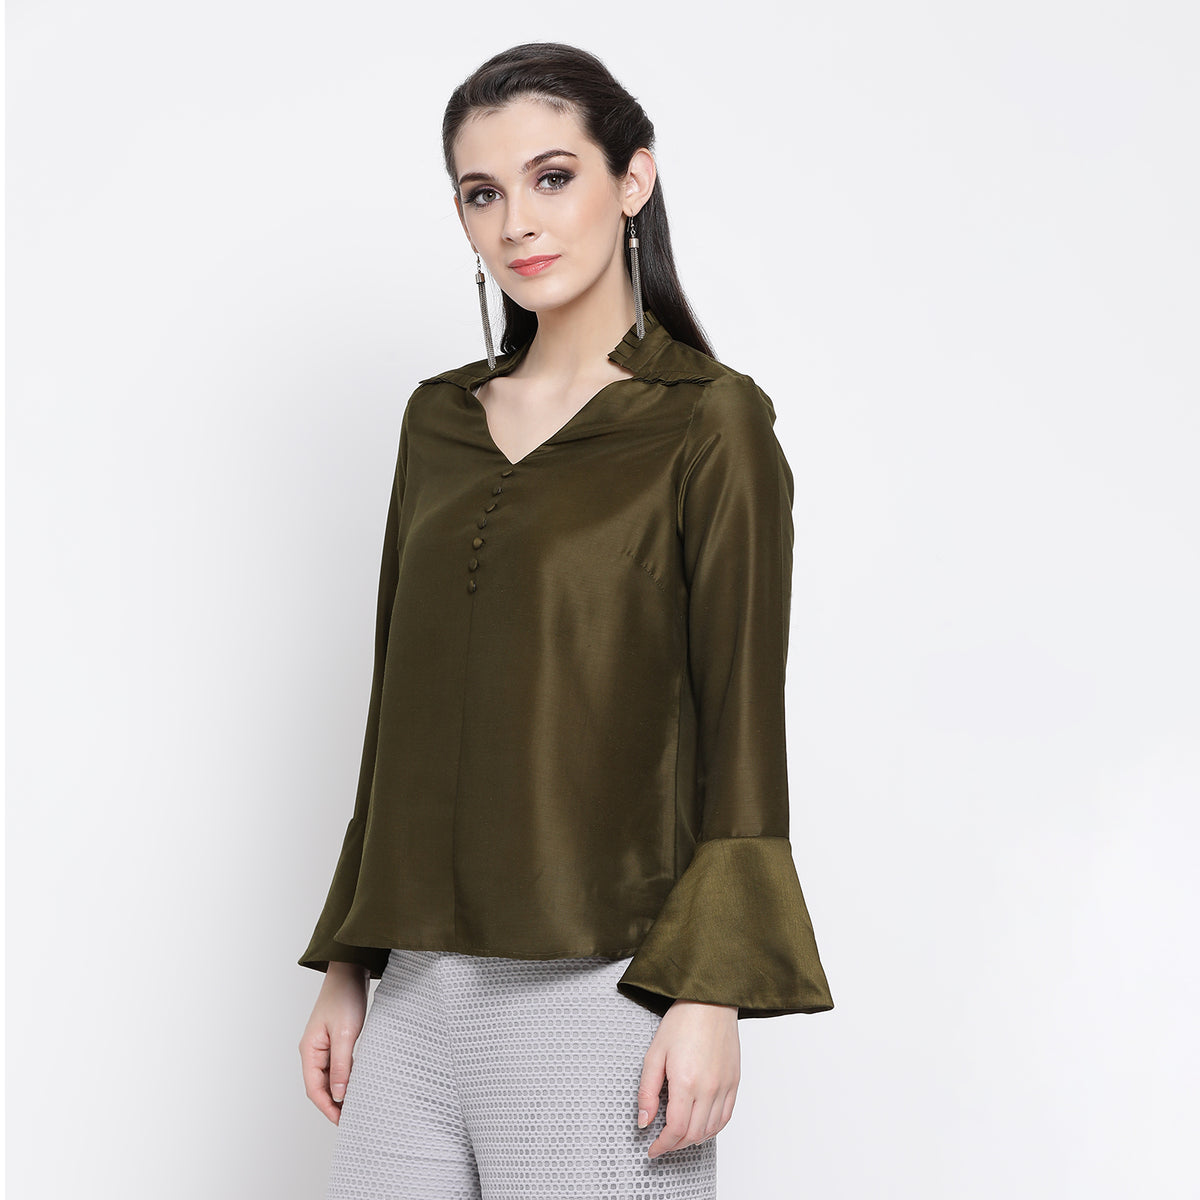 Dark Olive Top With Frill Collar And Buttons